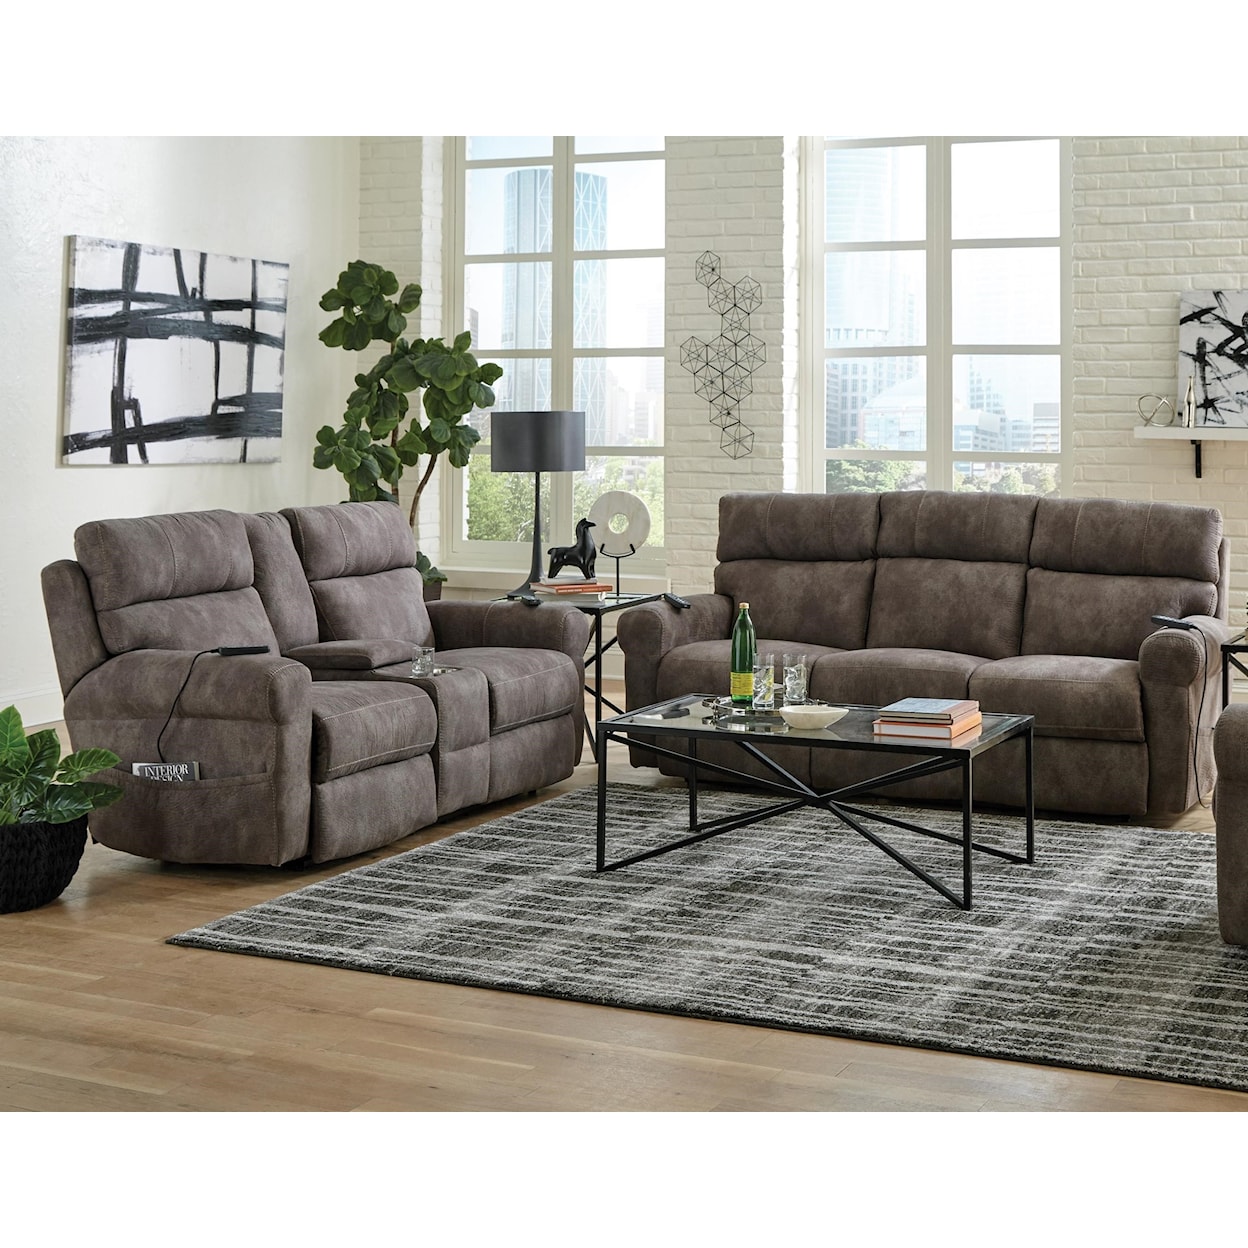 Catnapper 301 Tranquility Power Reclining Living Room Group